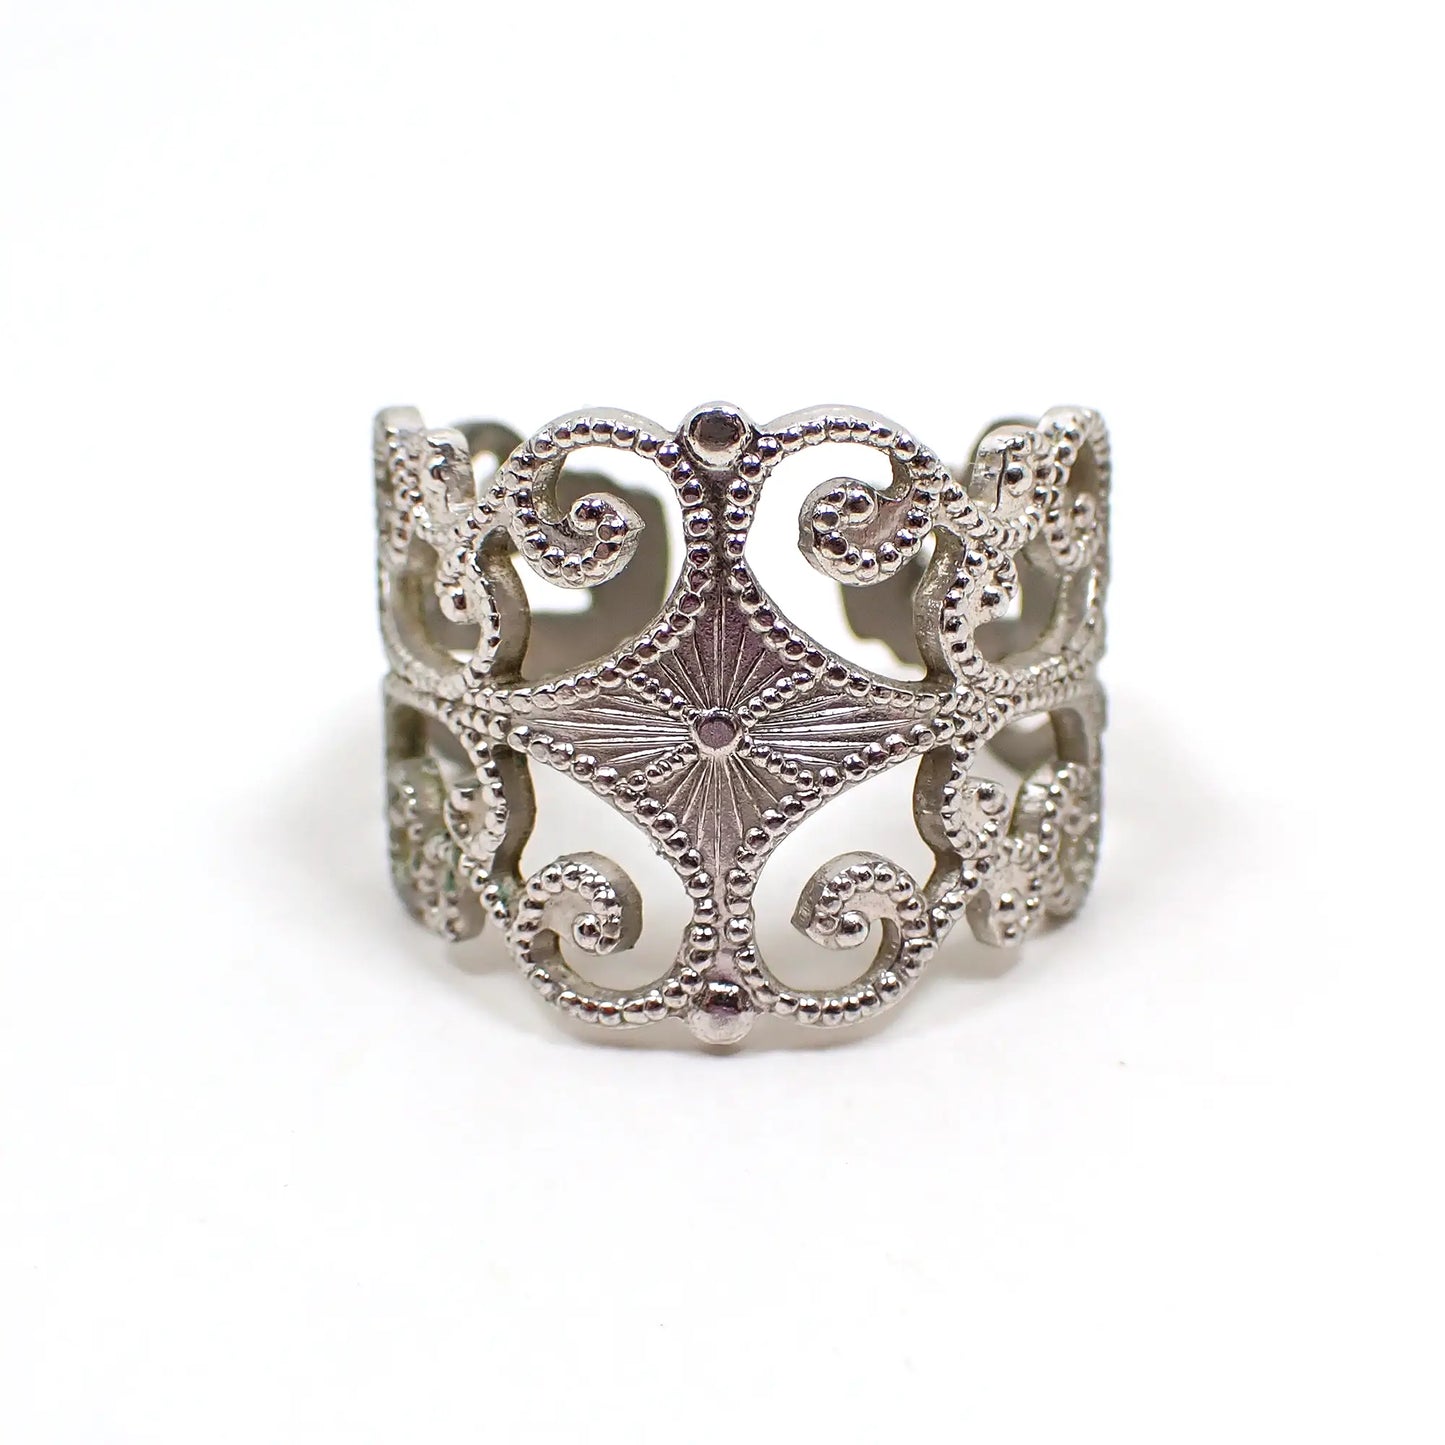 Front view of the retro vintage Sarah Coventry adjustable ring. The metal is silver tone in color. It has a filigree pattern with dots on curls and a diamond shaped area on the middle front with a starburst design.